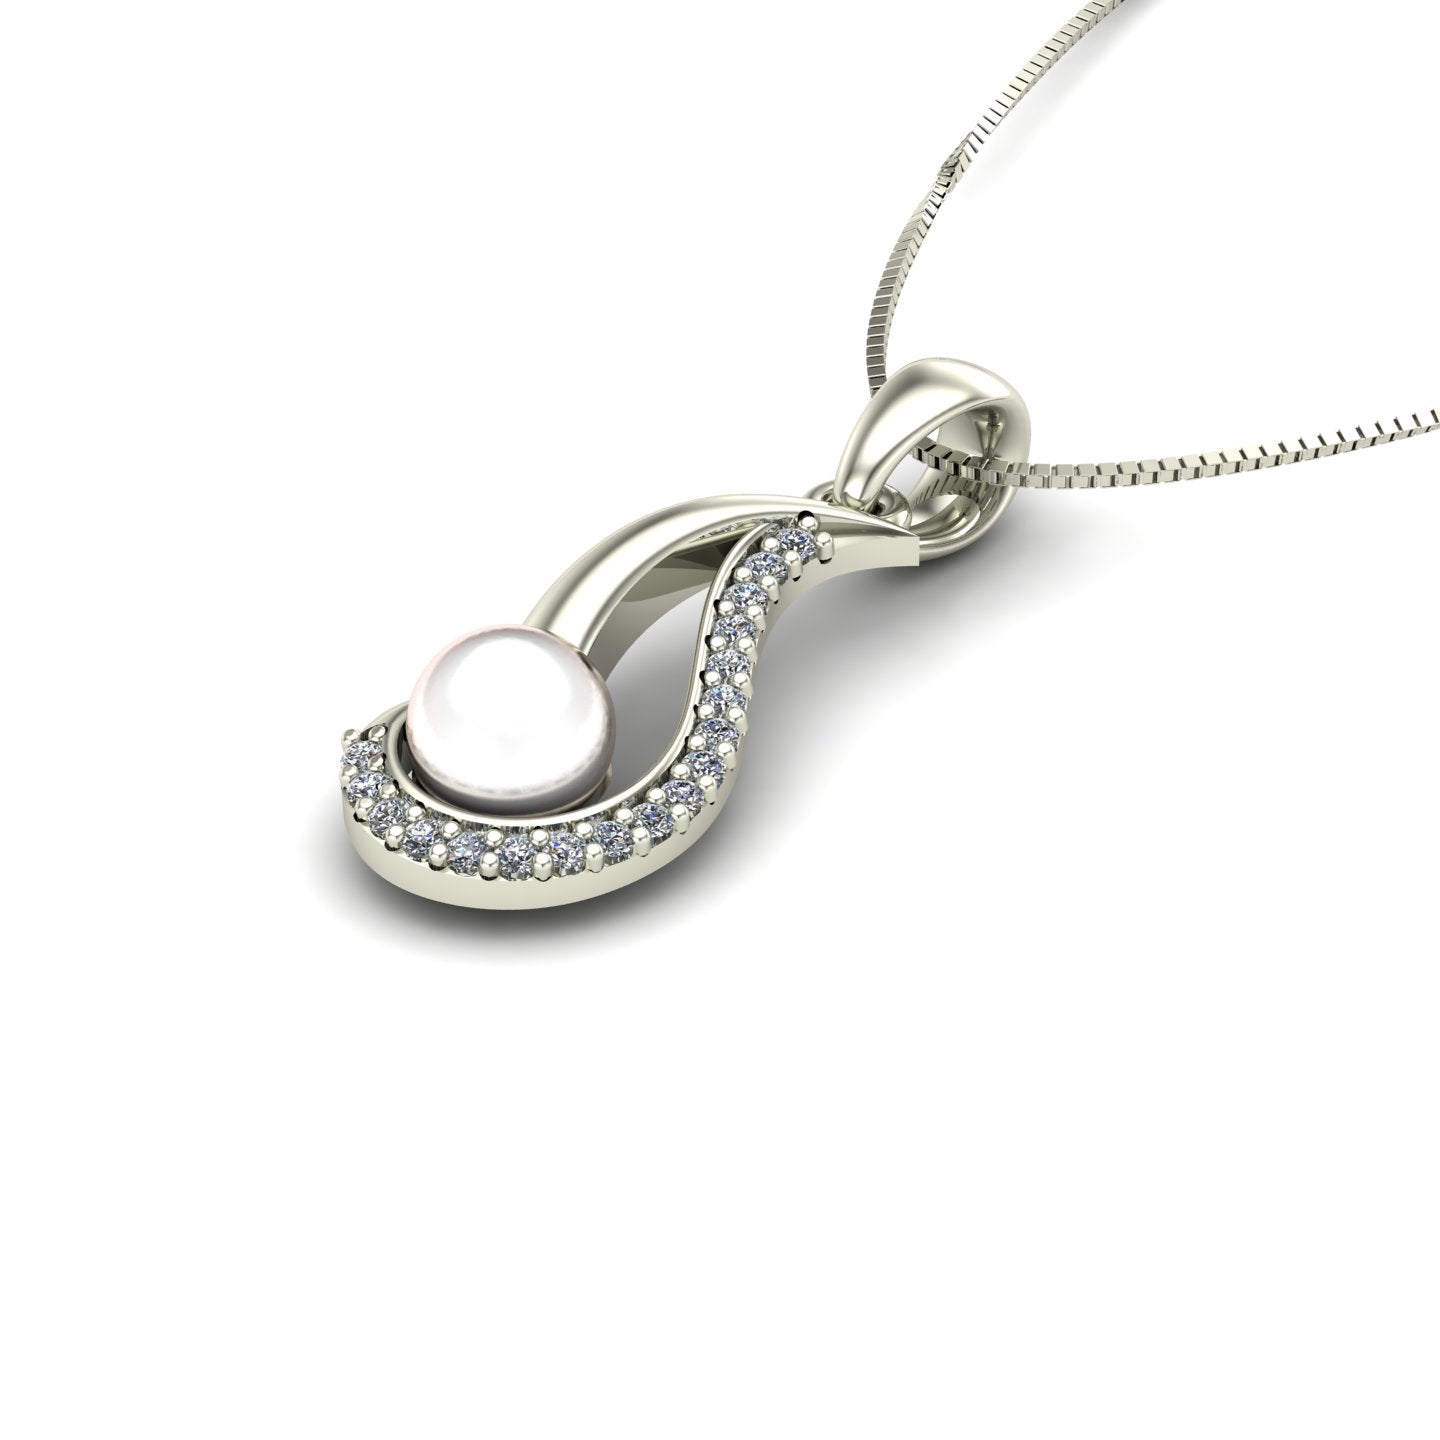 pearl and diamond swirl pendant in 14k white gold - Charles Babb Designs - side view